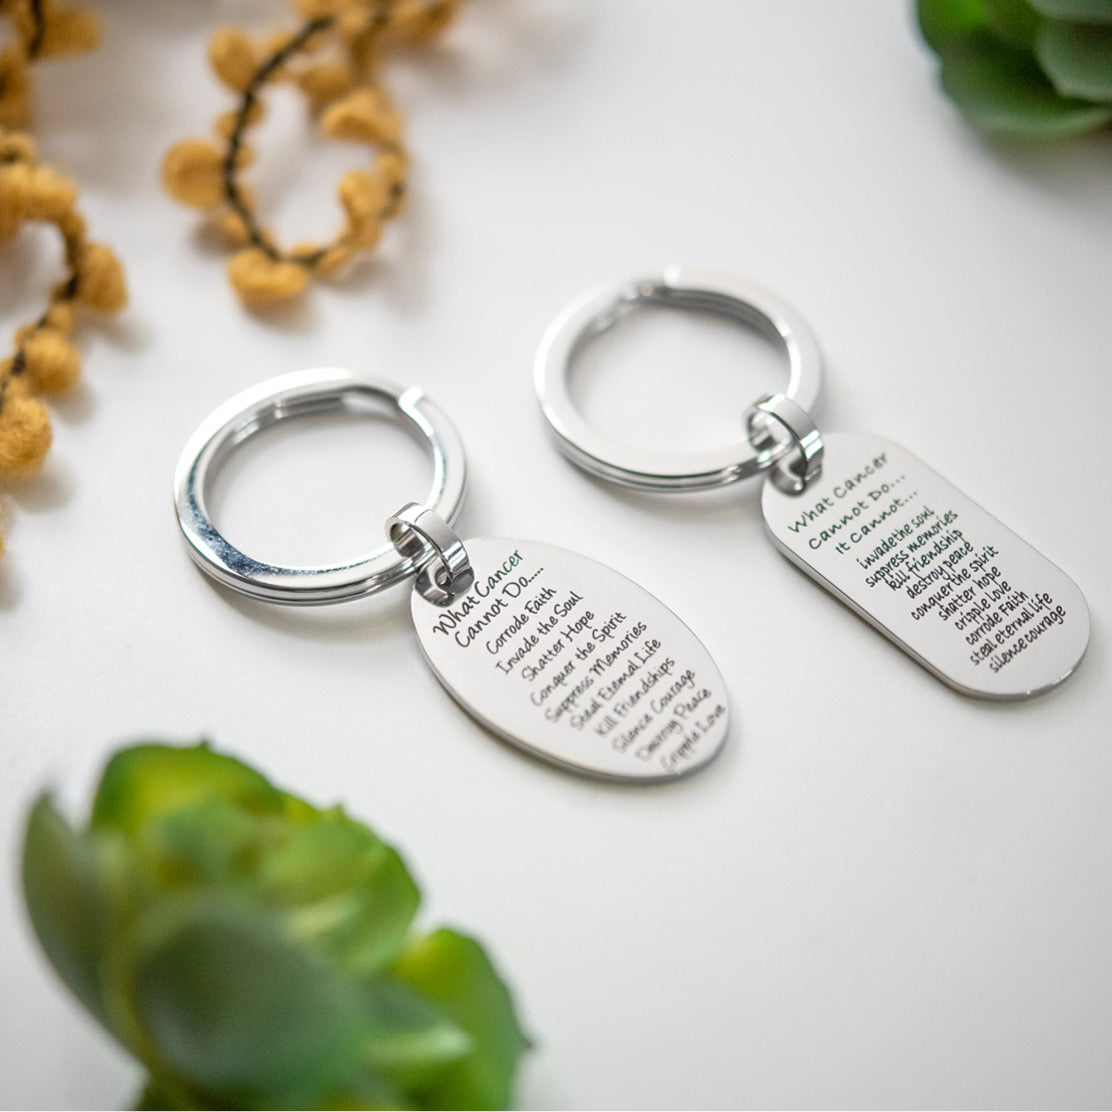 What Cancer Cannot Do Inspirational Dog Tag Cancer Key Ring - Cancer Support & Encouragement Gift